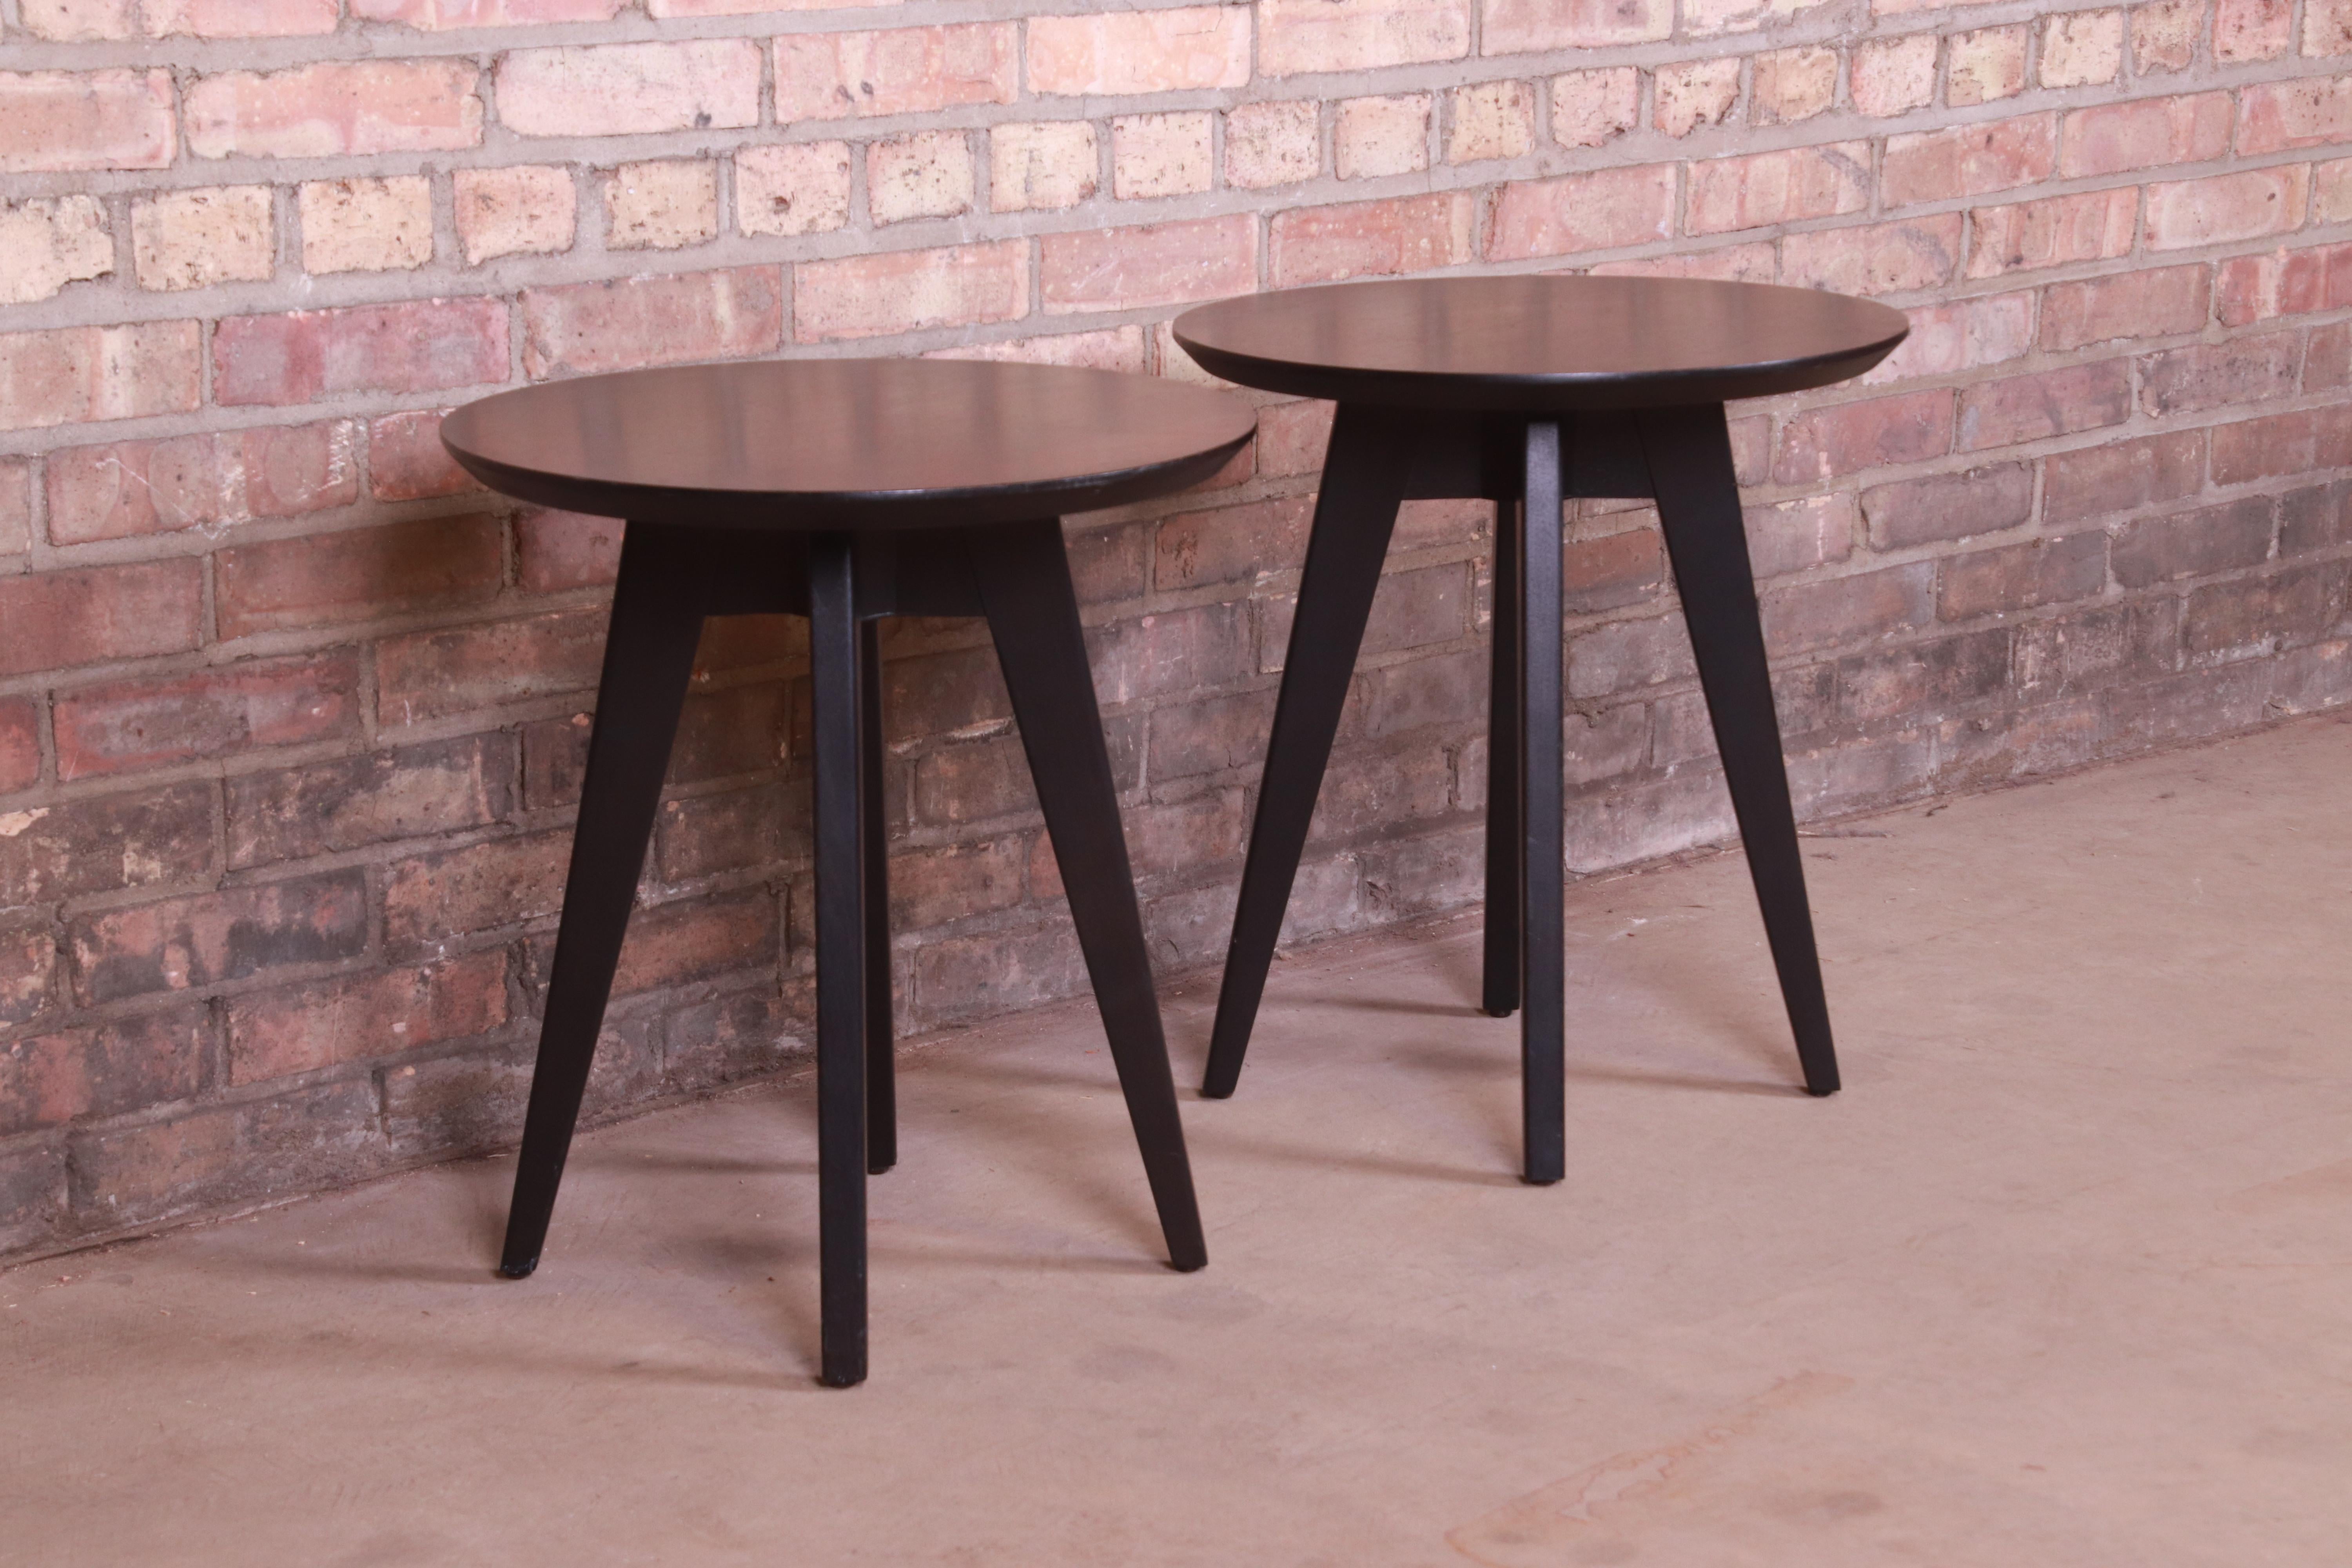 Wood Jens Risom for Knoll Mid-Century Modern Black Lacquered Side Tables, Pair